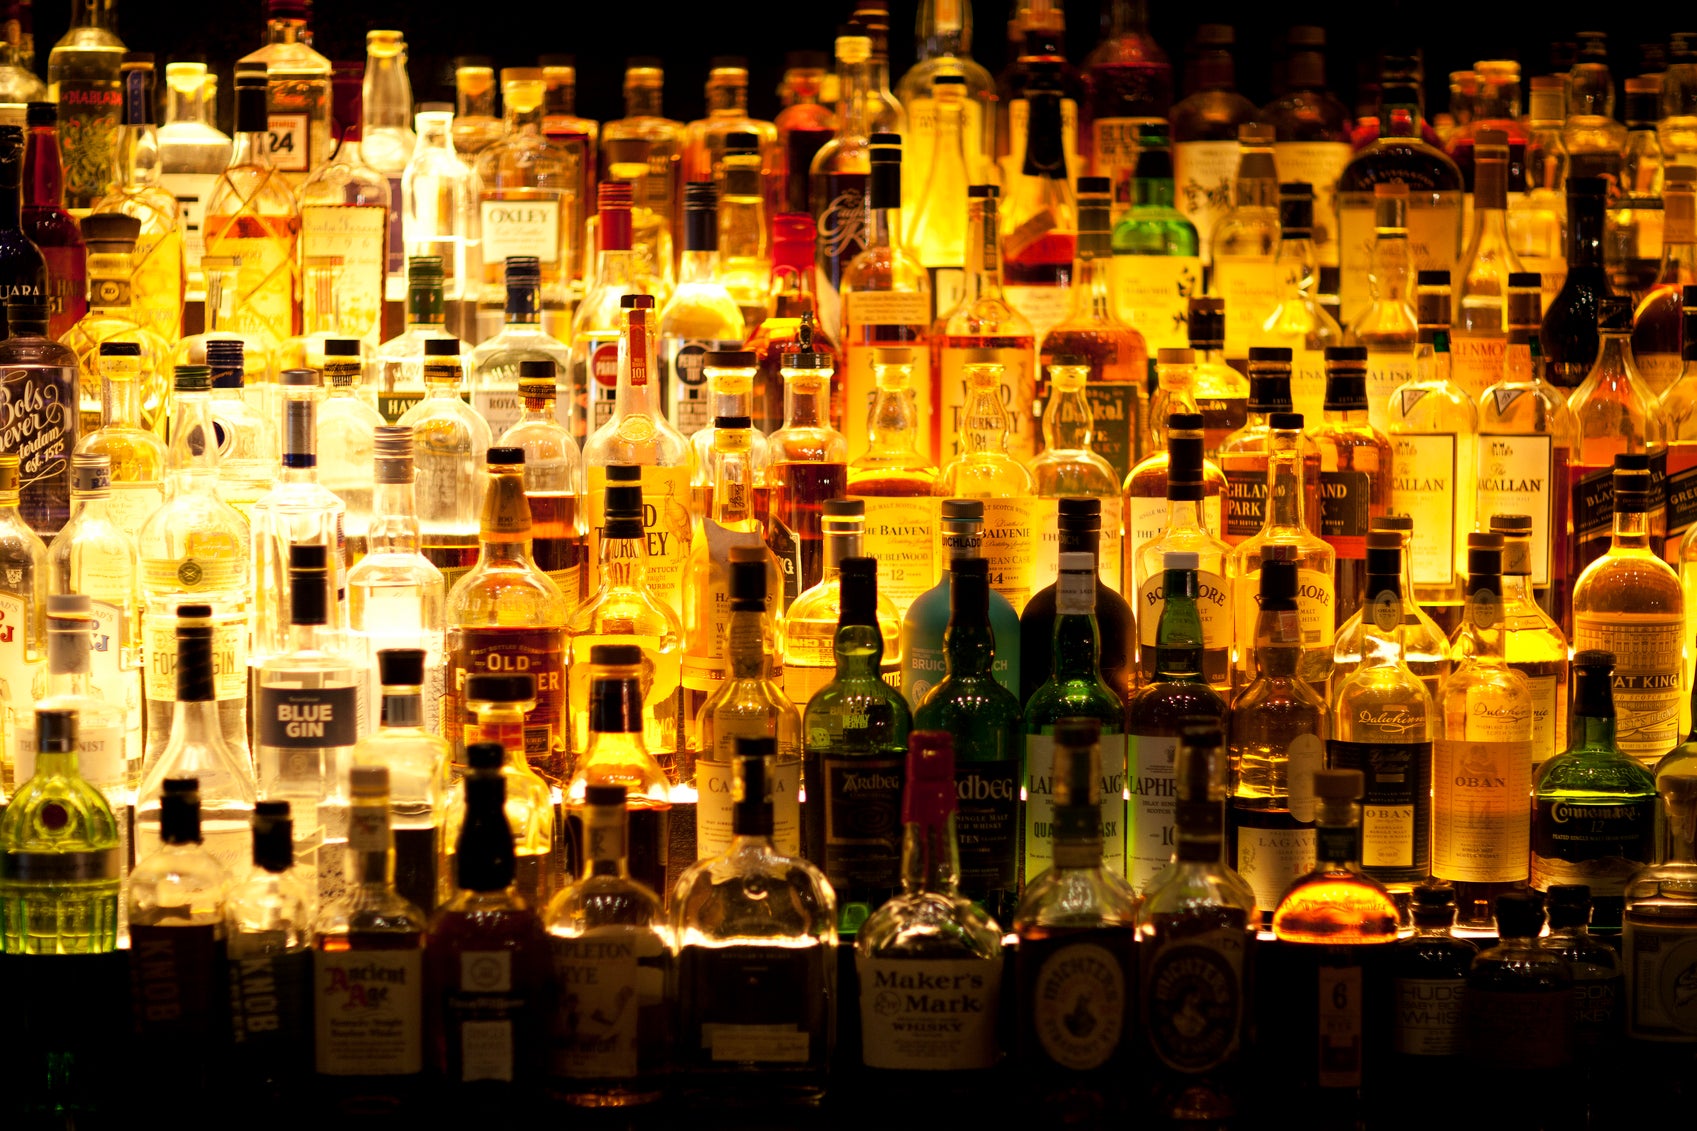 Chinese drinkers can’t seem to get enough of Scotch whisky